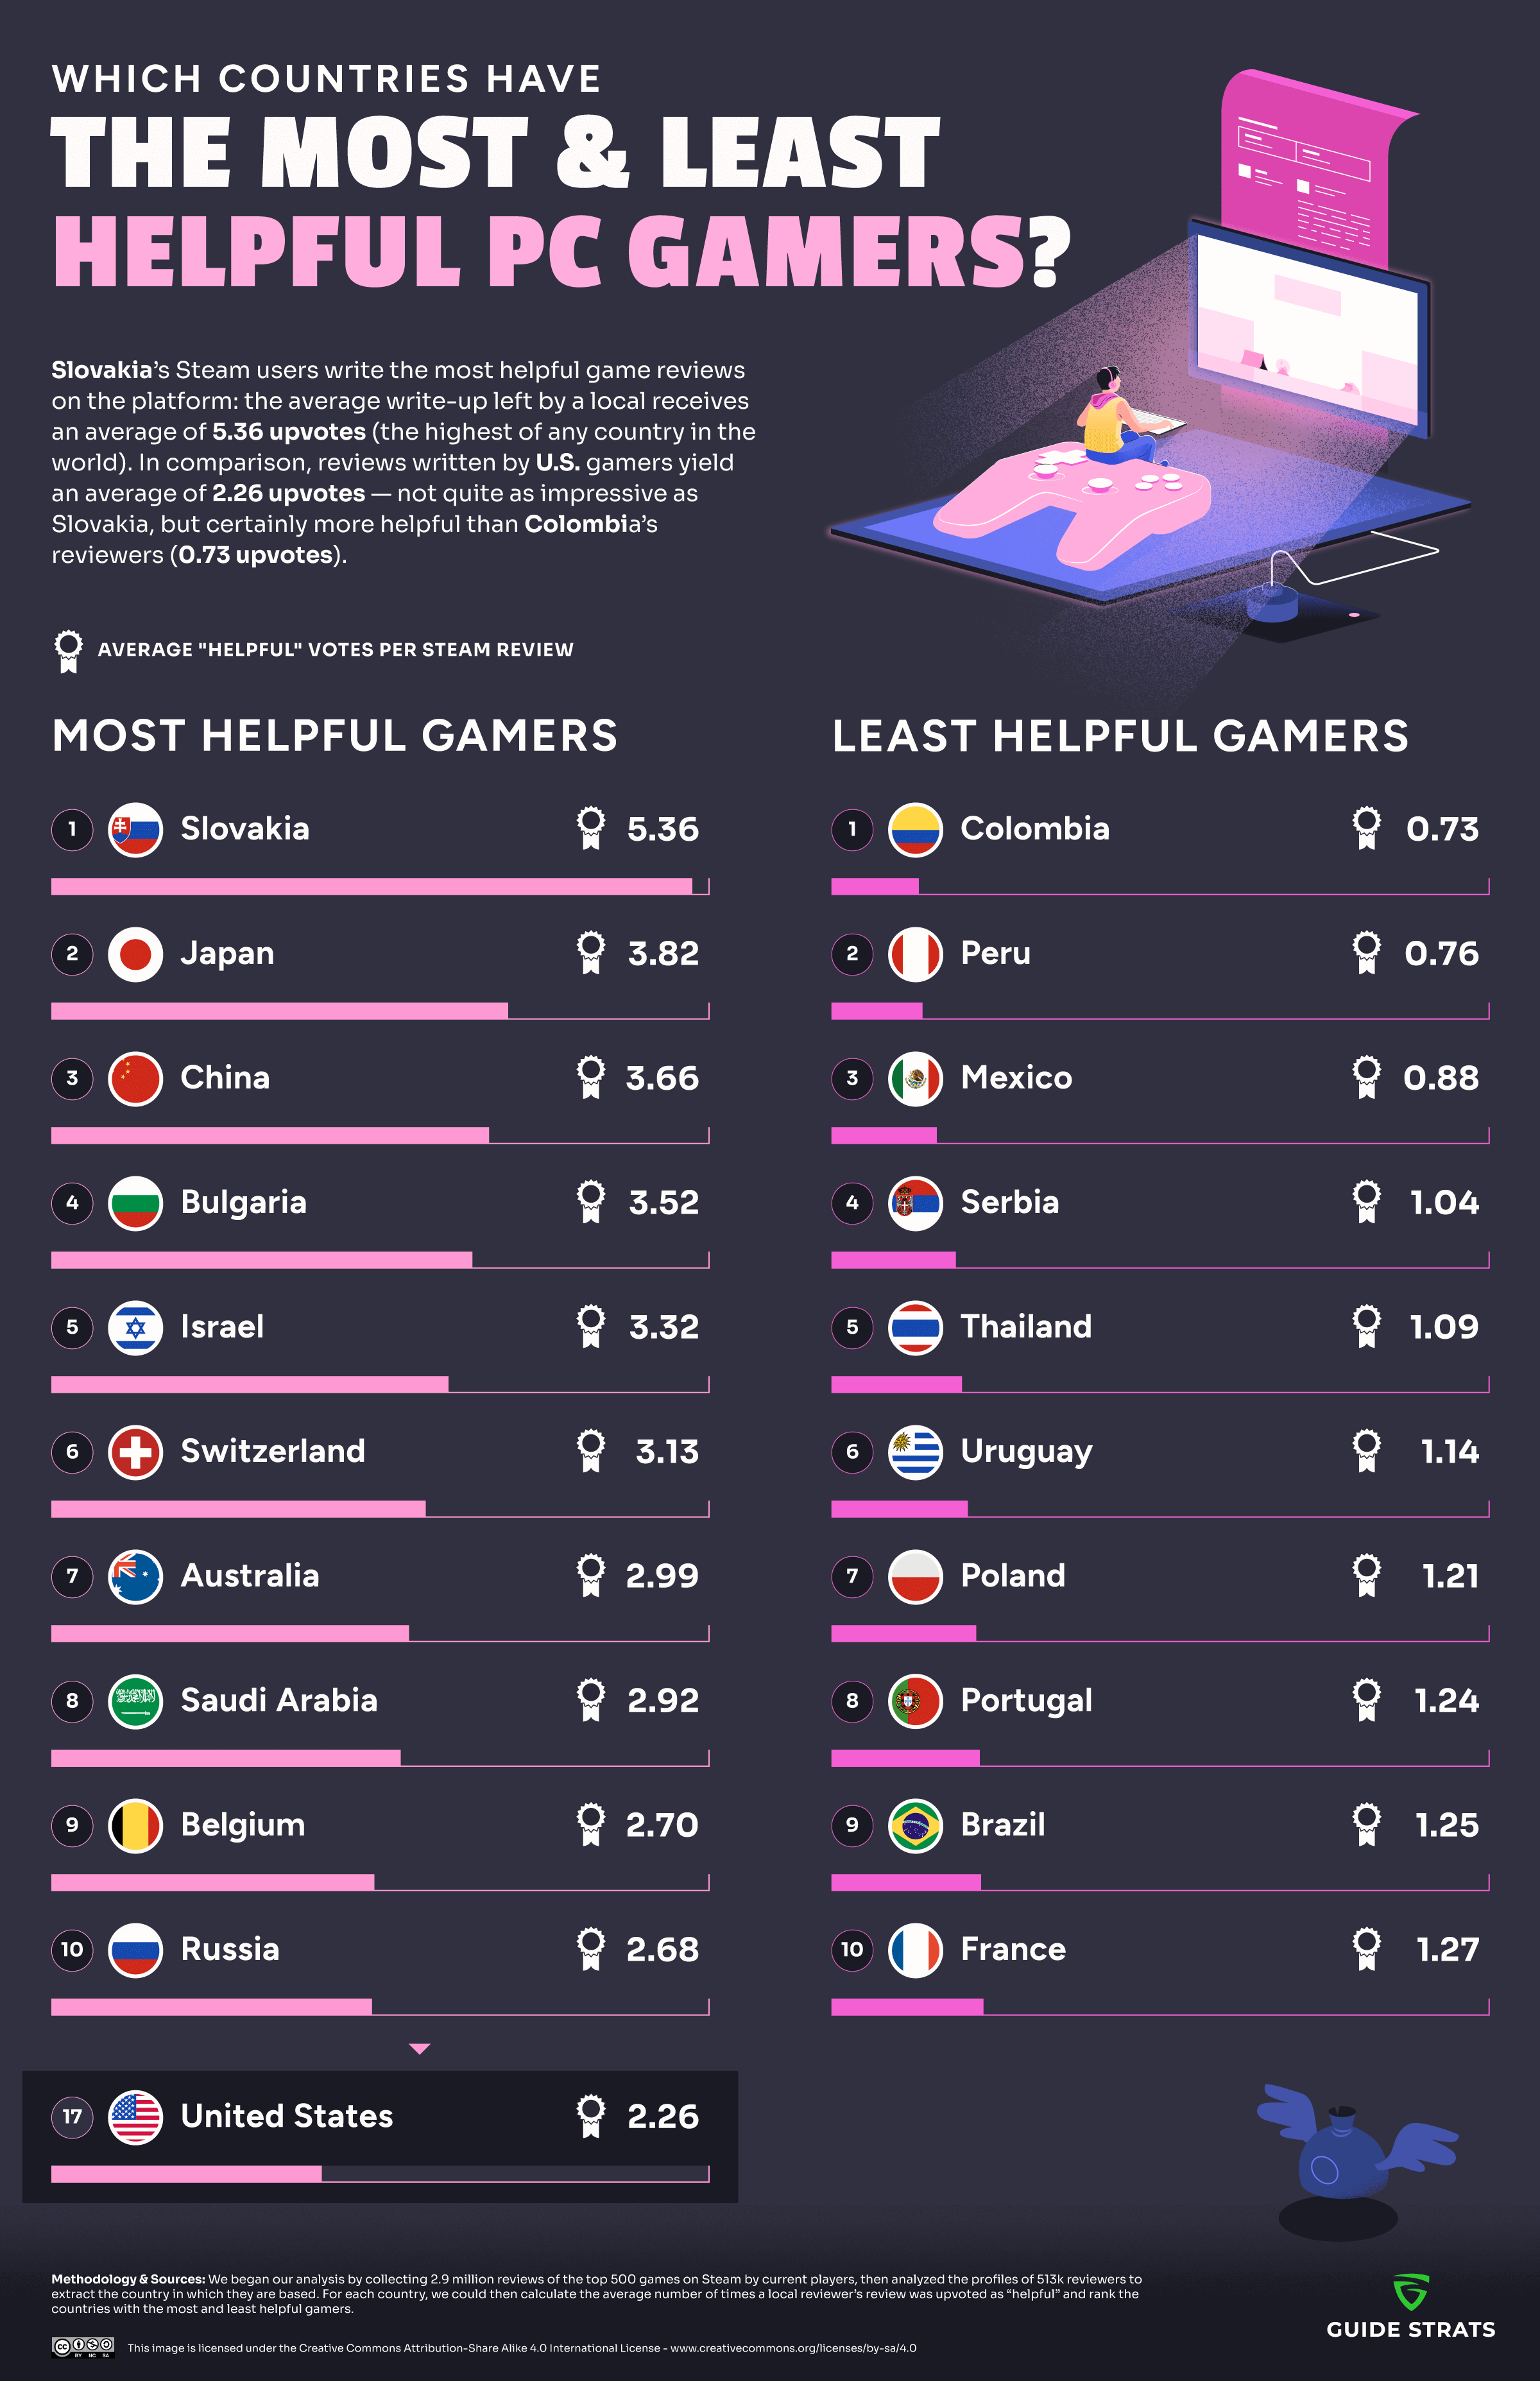 Which Countries Have the Most and Least Helpful PC Gamers?